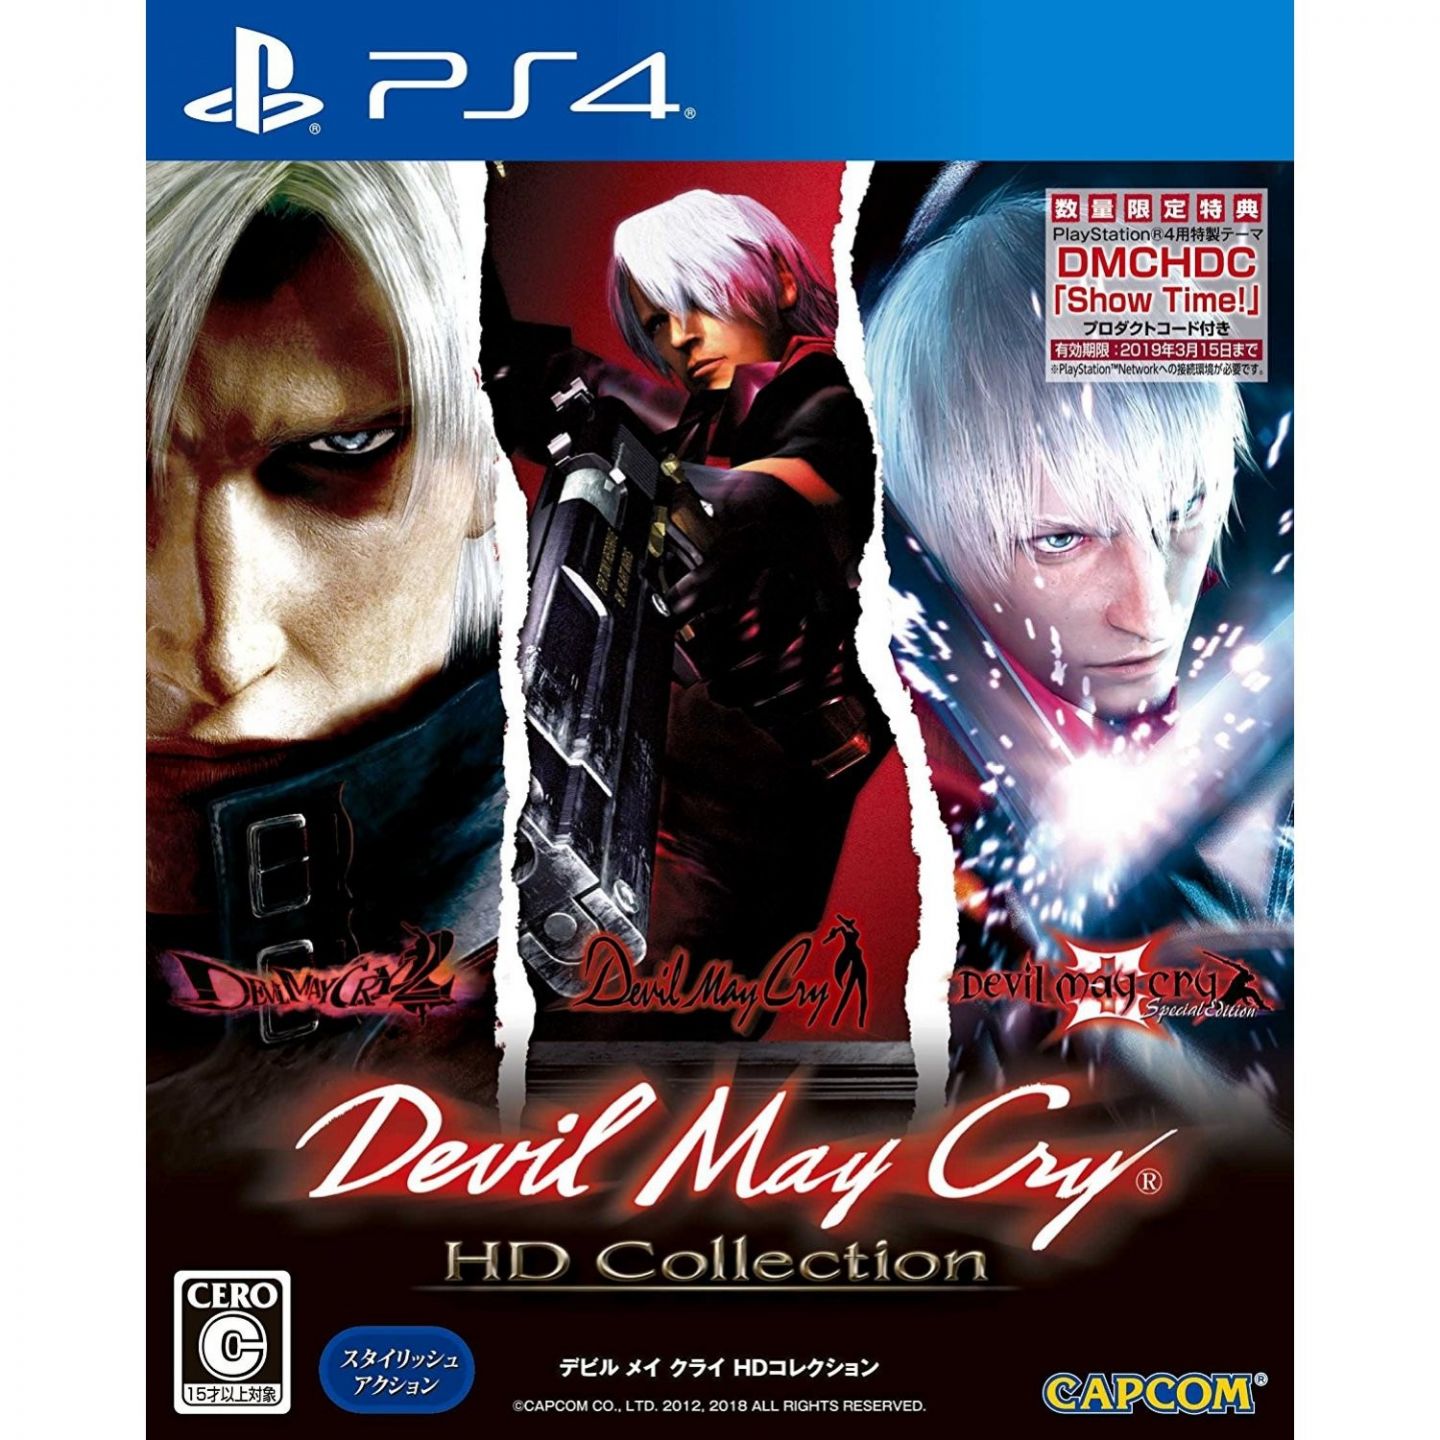 Devil may cry collection русификатор. Devil May Cry ps3. Devil May Cry 1 ps4. Devil May Cry 4 (ps3).